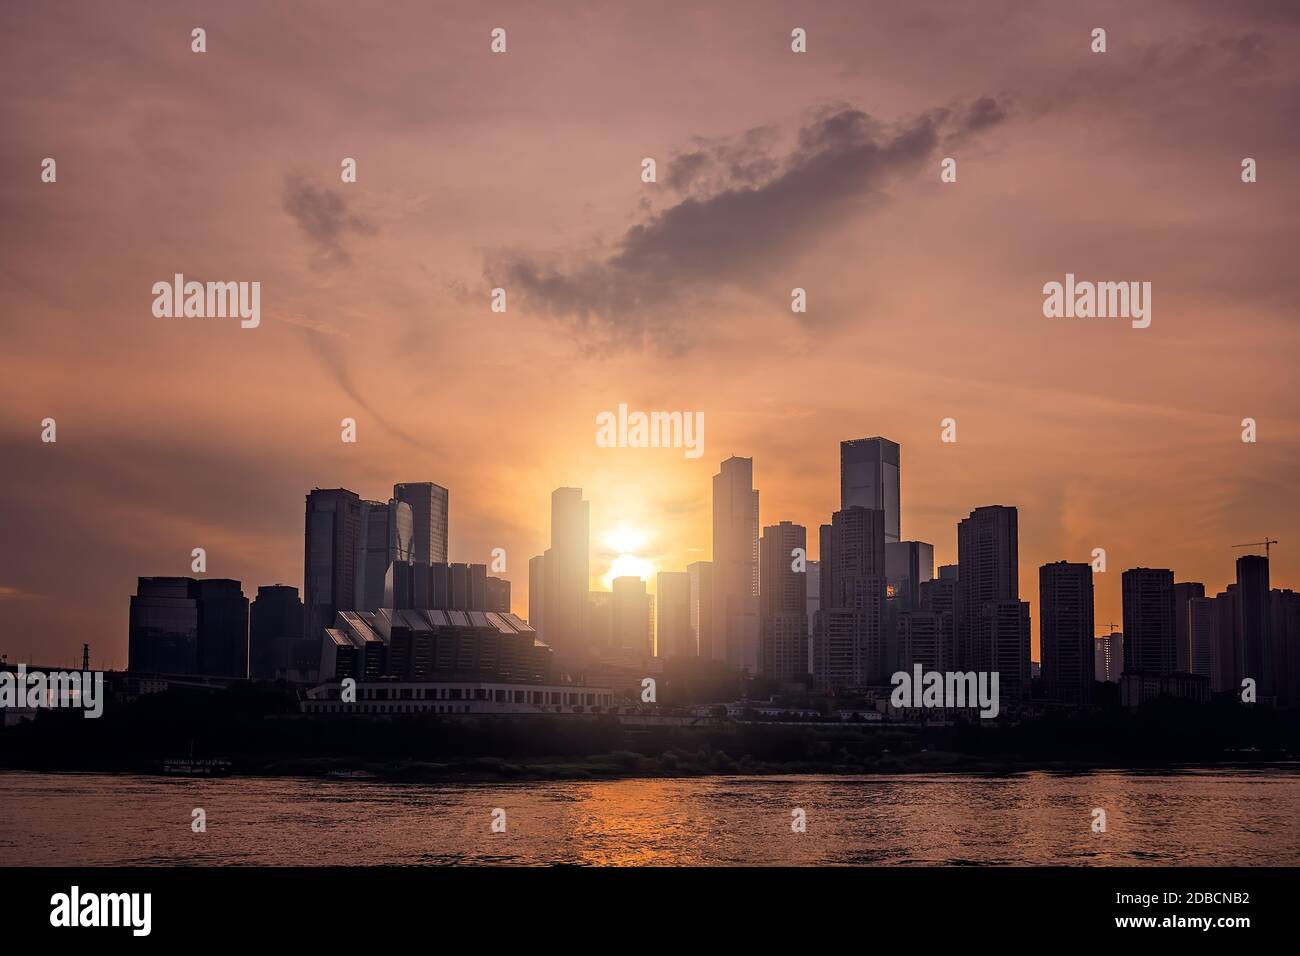 The silhouettes of buildings surrounded by the sea under the sunlight during the sunset in Chongqing, China Stock Photo